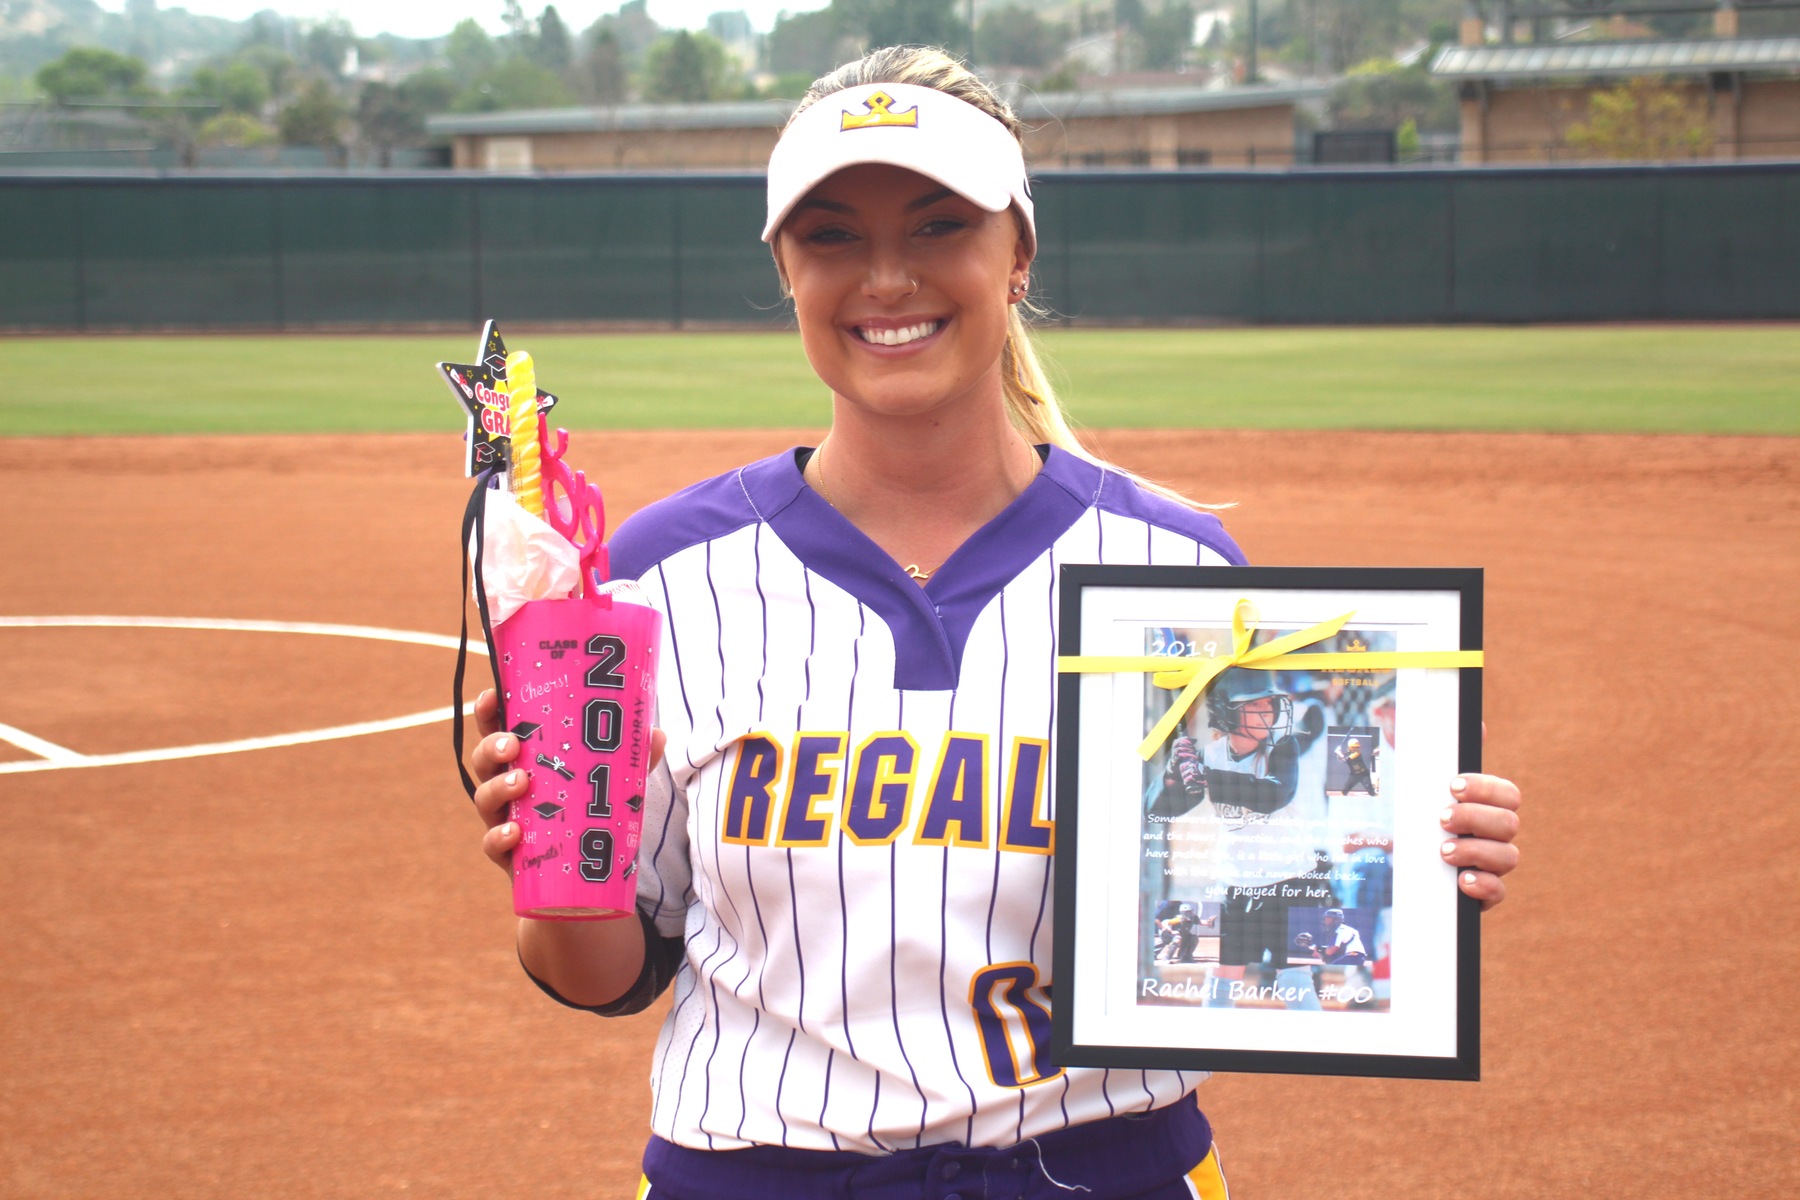 Regals’ Heroics on Senior Day; Softball Ends Season with Doublerheader Sweep of Tigers